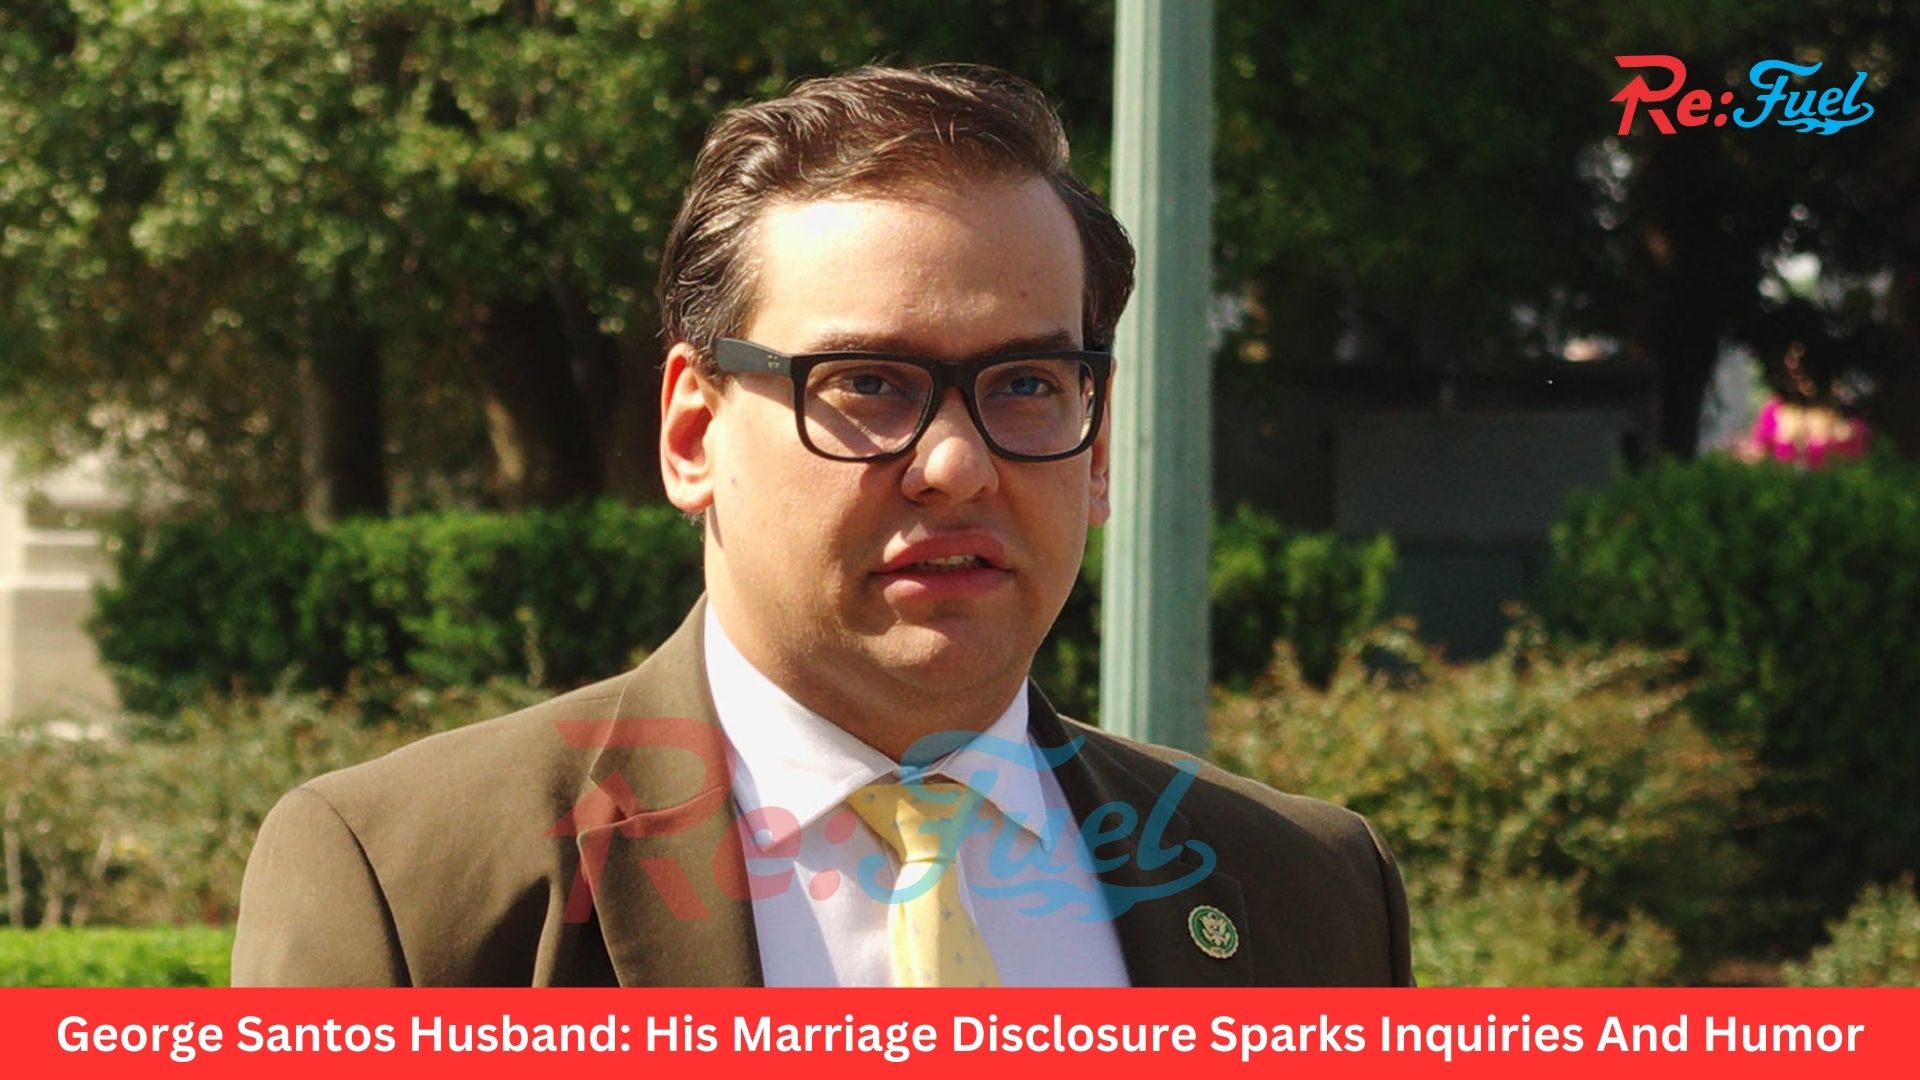 George Santos Husband: His Marriage Disclosure Sparks Inquiries And Humor